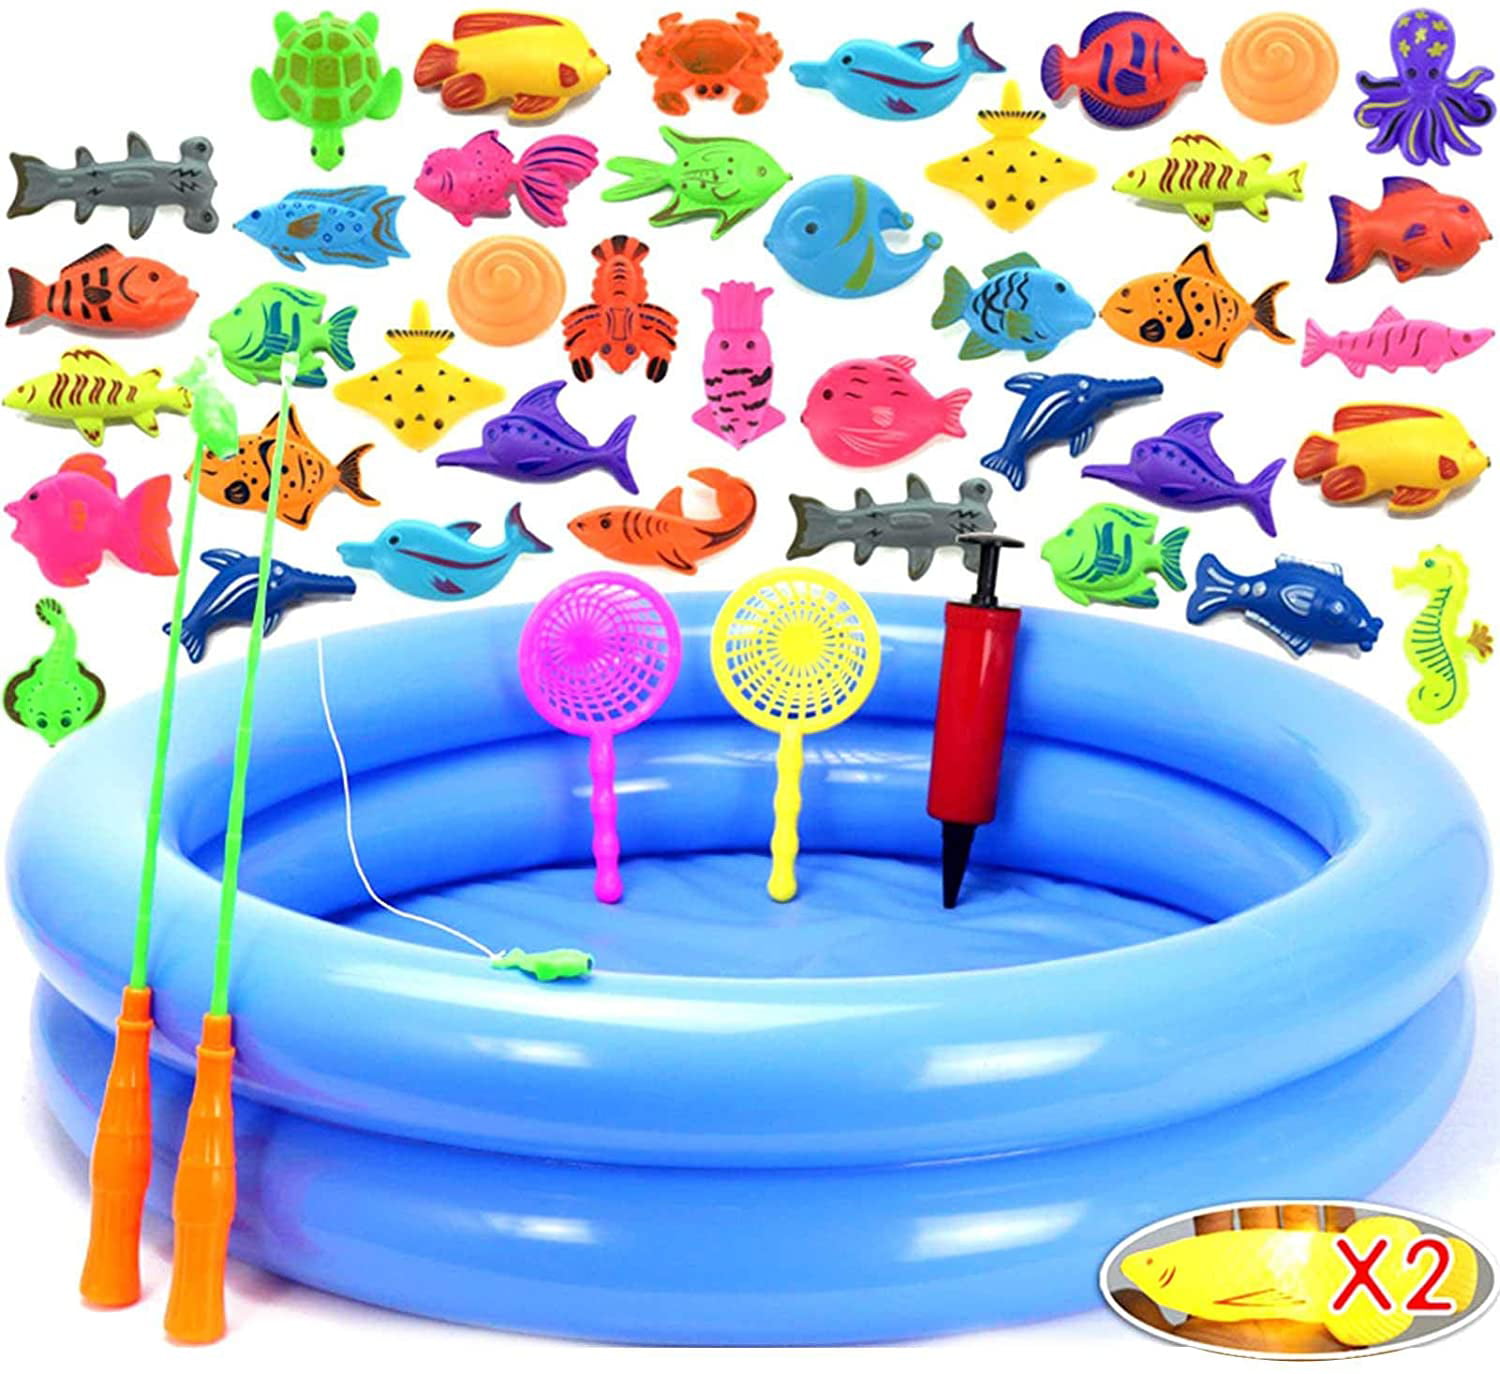 AKDSteel 50pcs Waterproof Magnetic Floating Fish Toys Fun Fishing Game Playset with Inflatable Pool Baby Learning & Education Bath Toys Fishing Basket Child Gift 